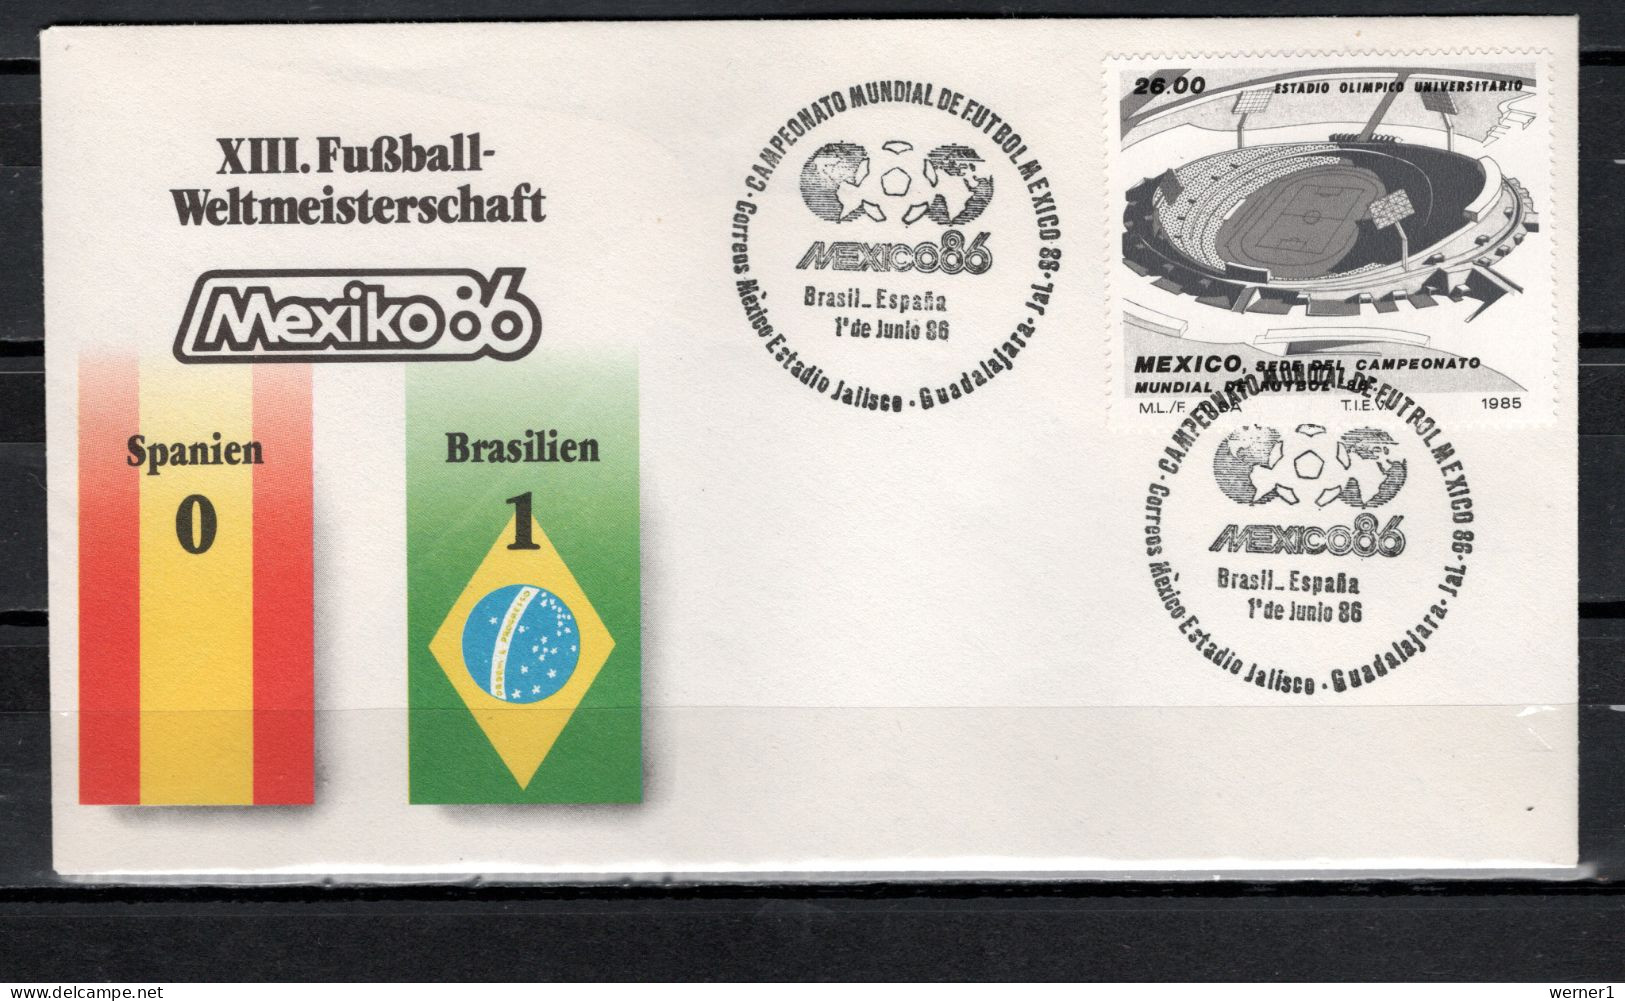 Mexico 1986 Football Soccer World Cup Commemorative Cover Match Spain - Brazil 0 : 1 - 1986 – Mexiko